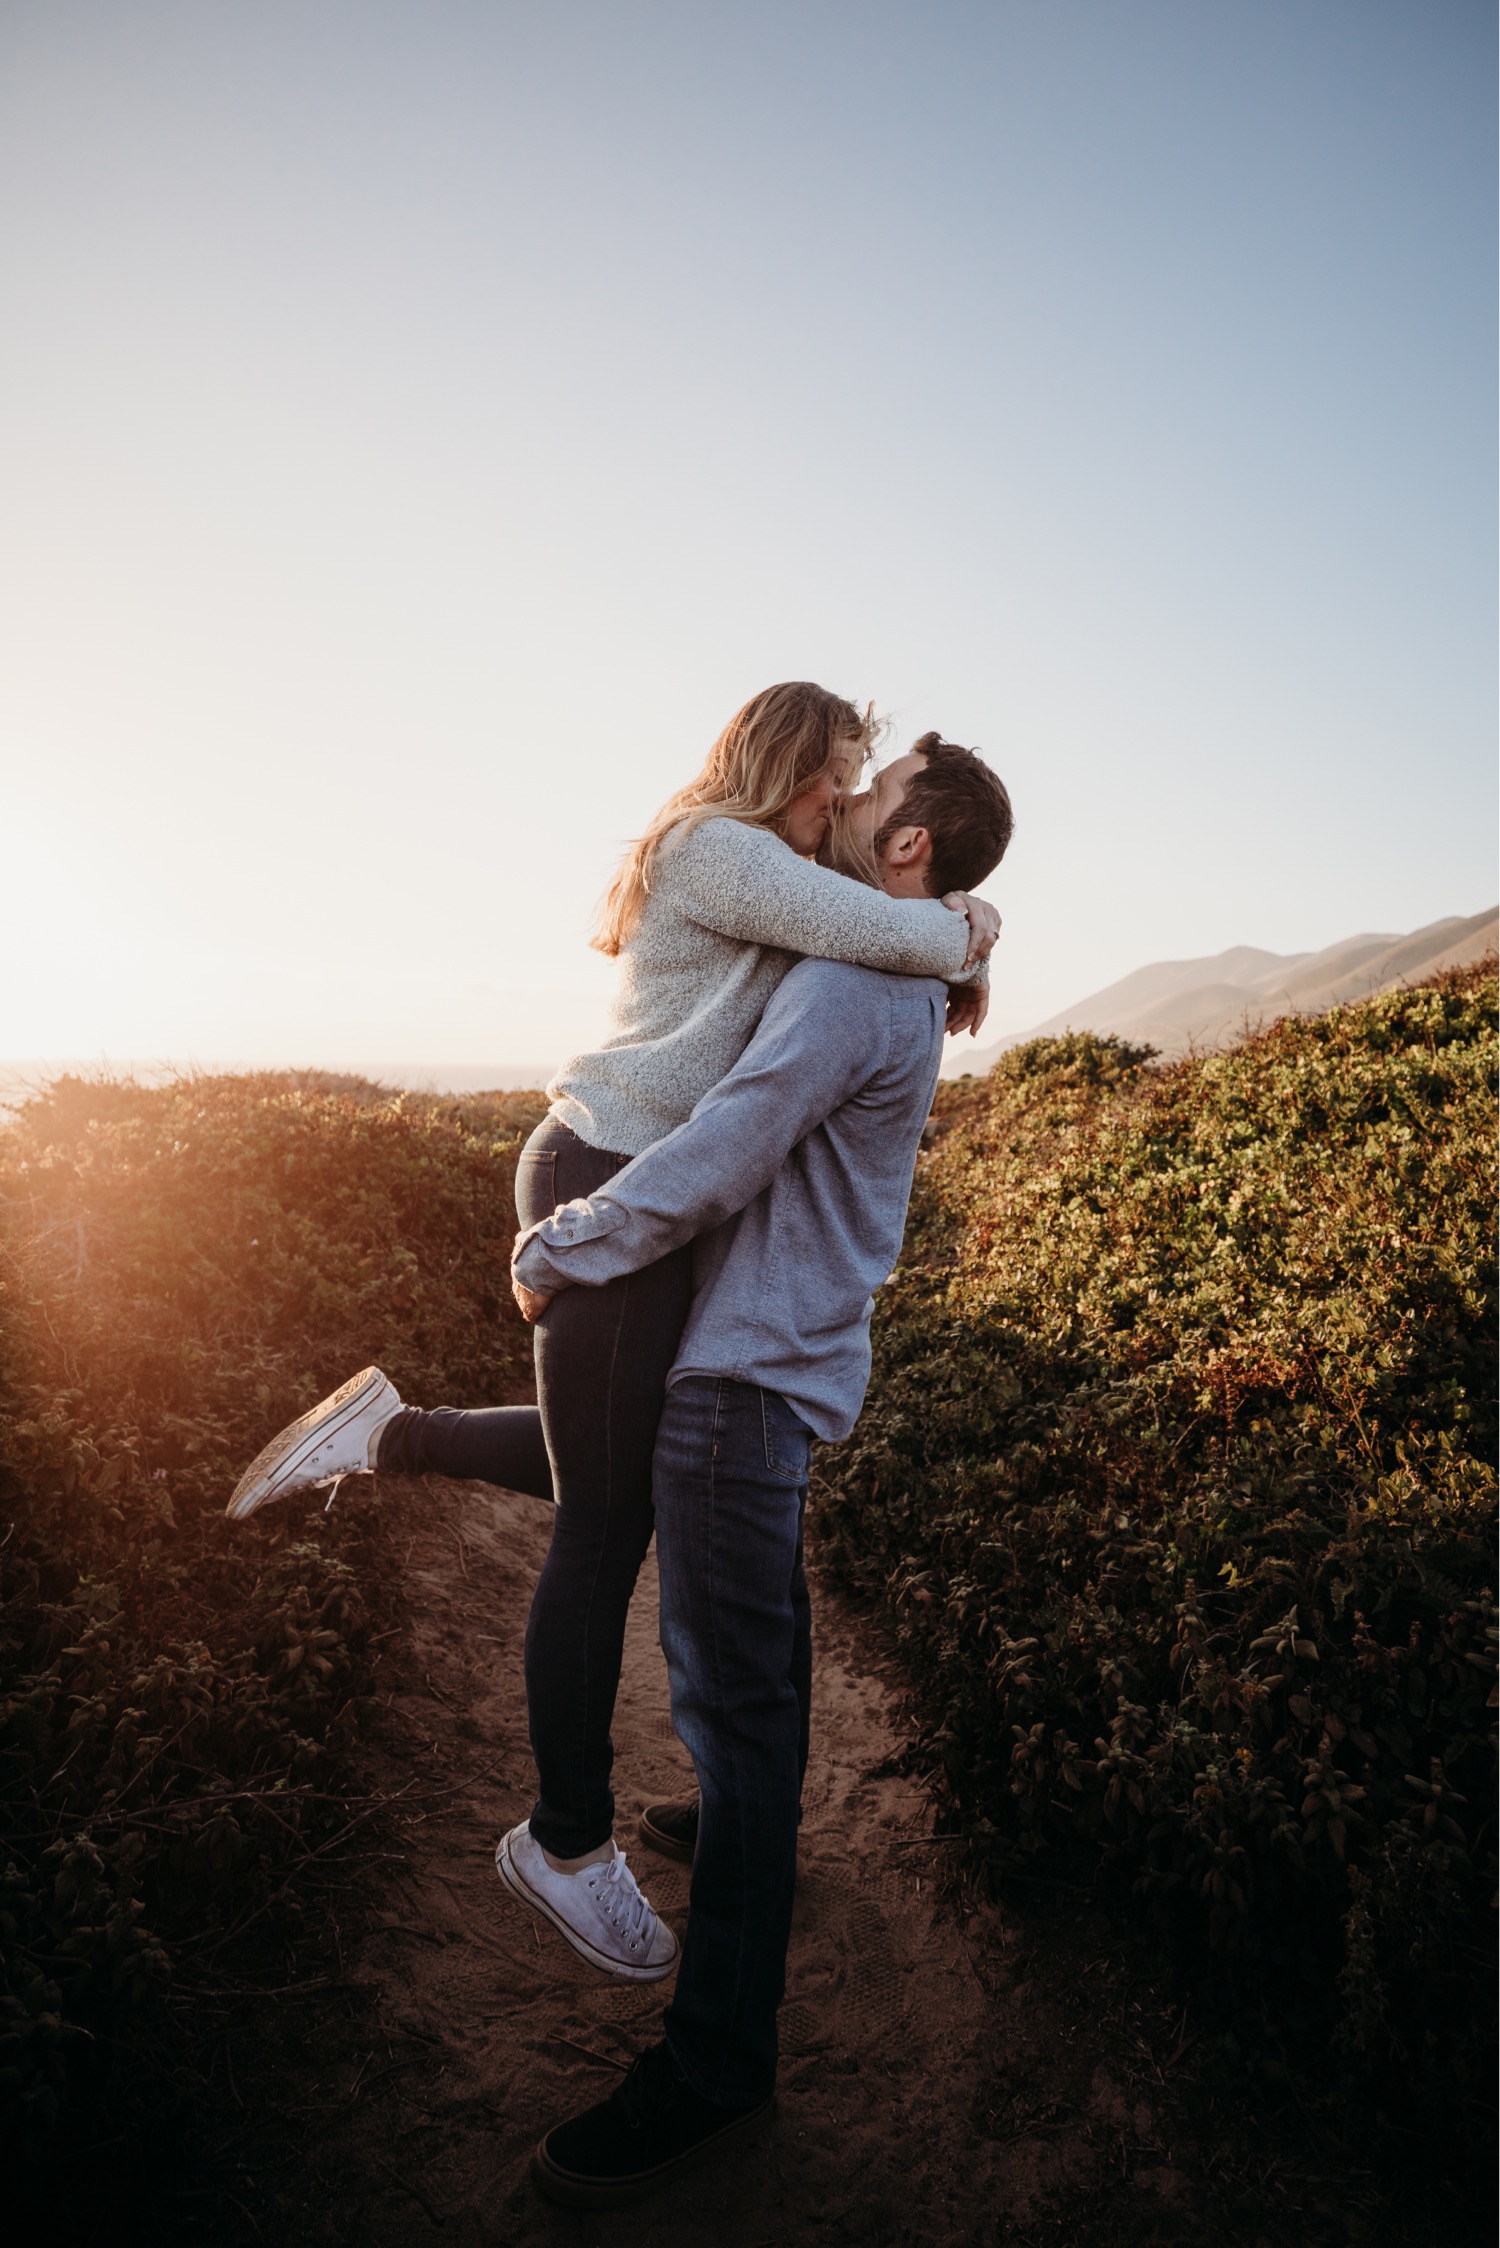 Man lifts woman as they kiss passionately at sunset during their engagement photoshoot in Big Sur, California.